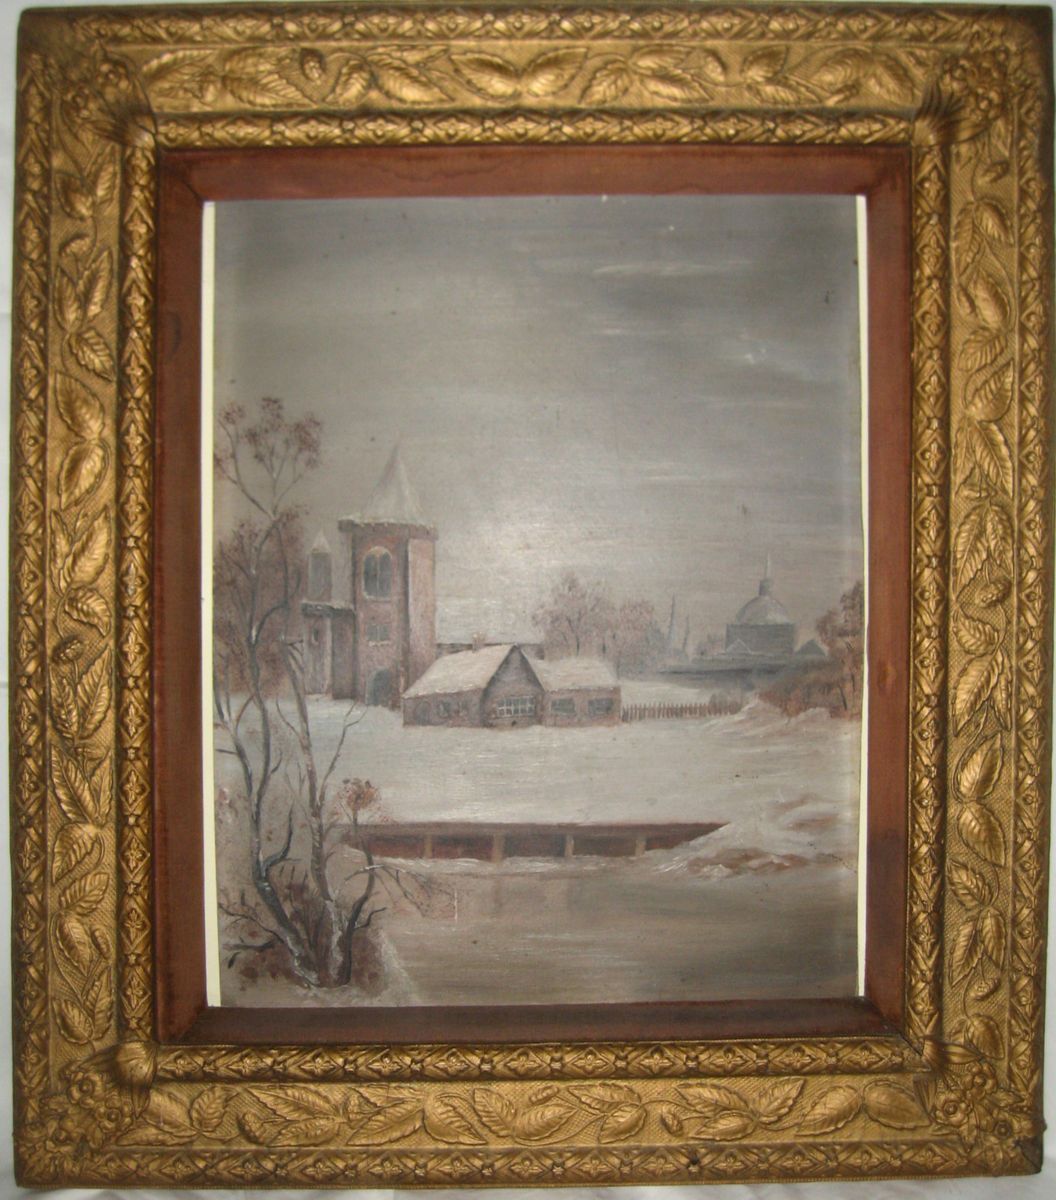 ANTIQUE 19thC AMERICAN FOLK ART OIL PAINTING OLD TENNESSEE SCHOOL AND 